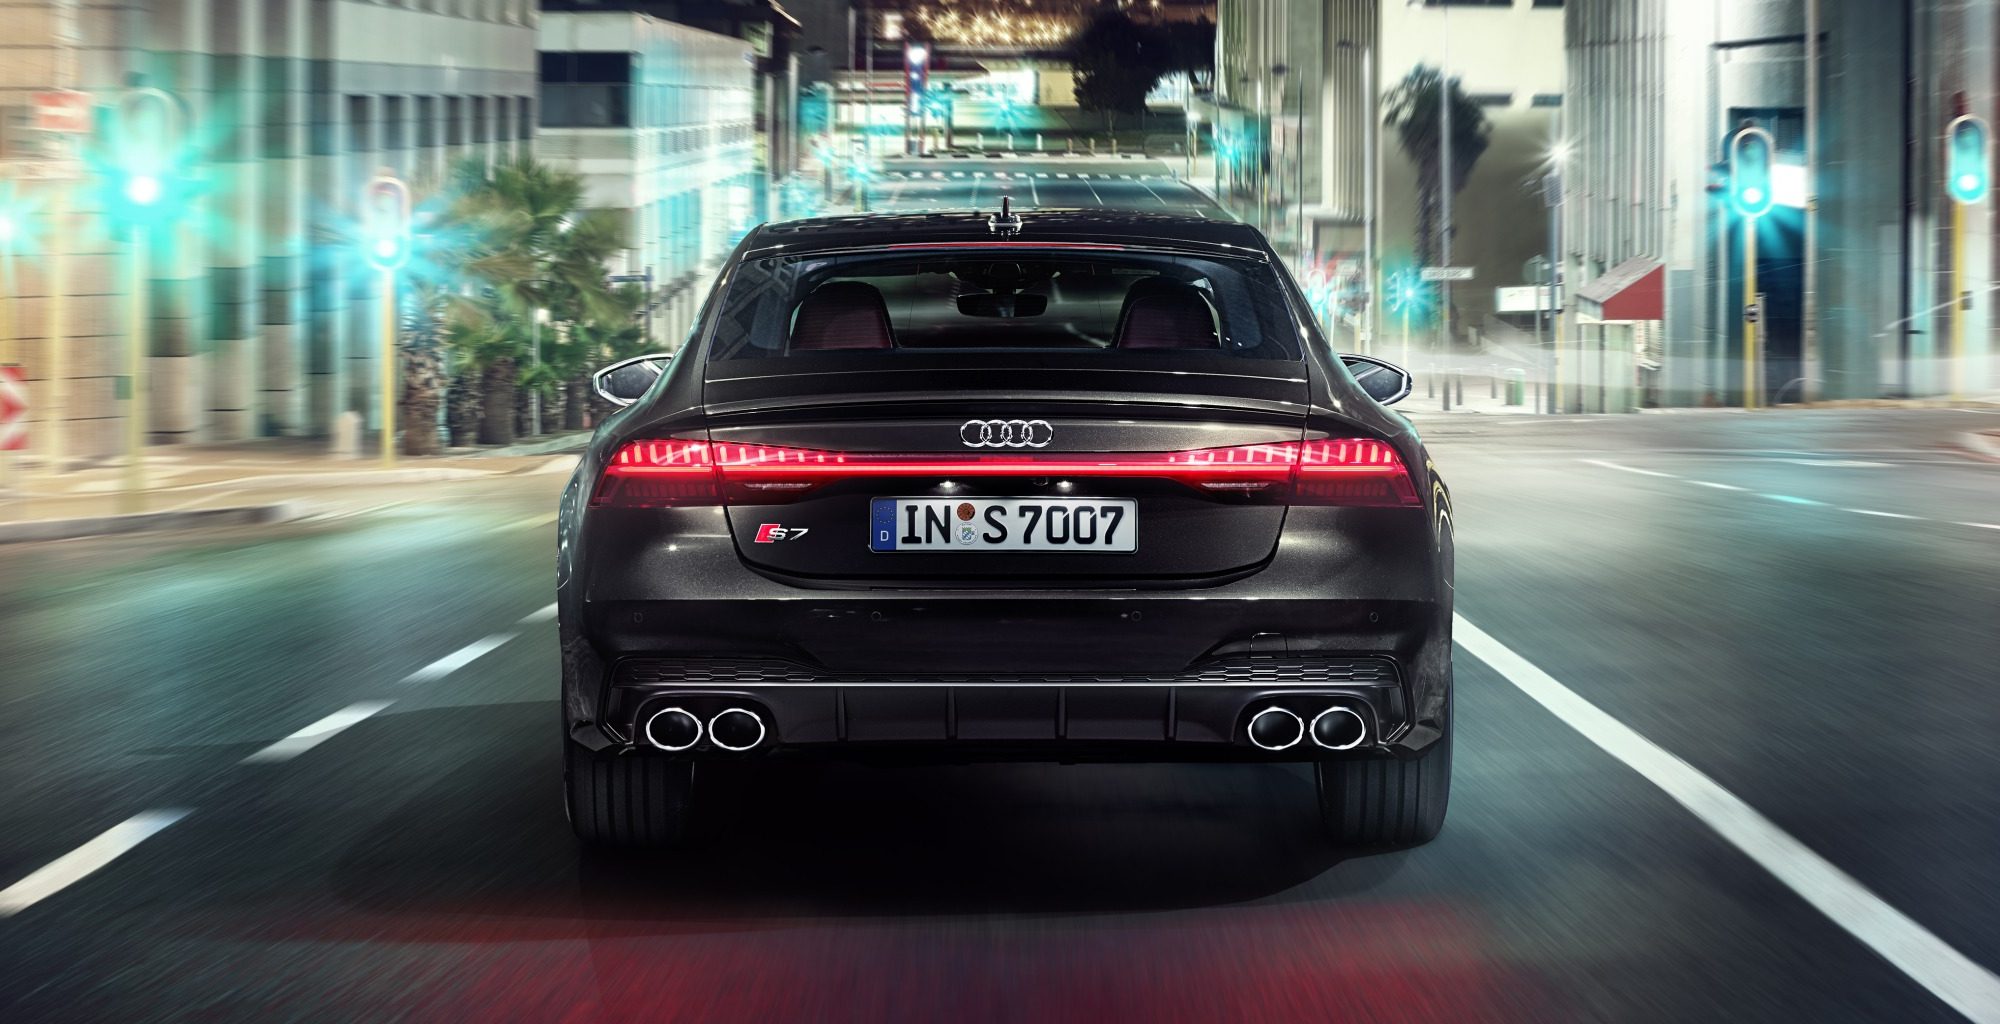 Black Audi S7 Sportback driving in the city at night time